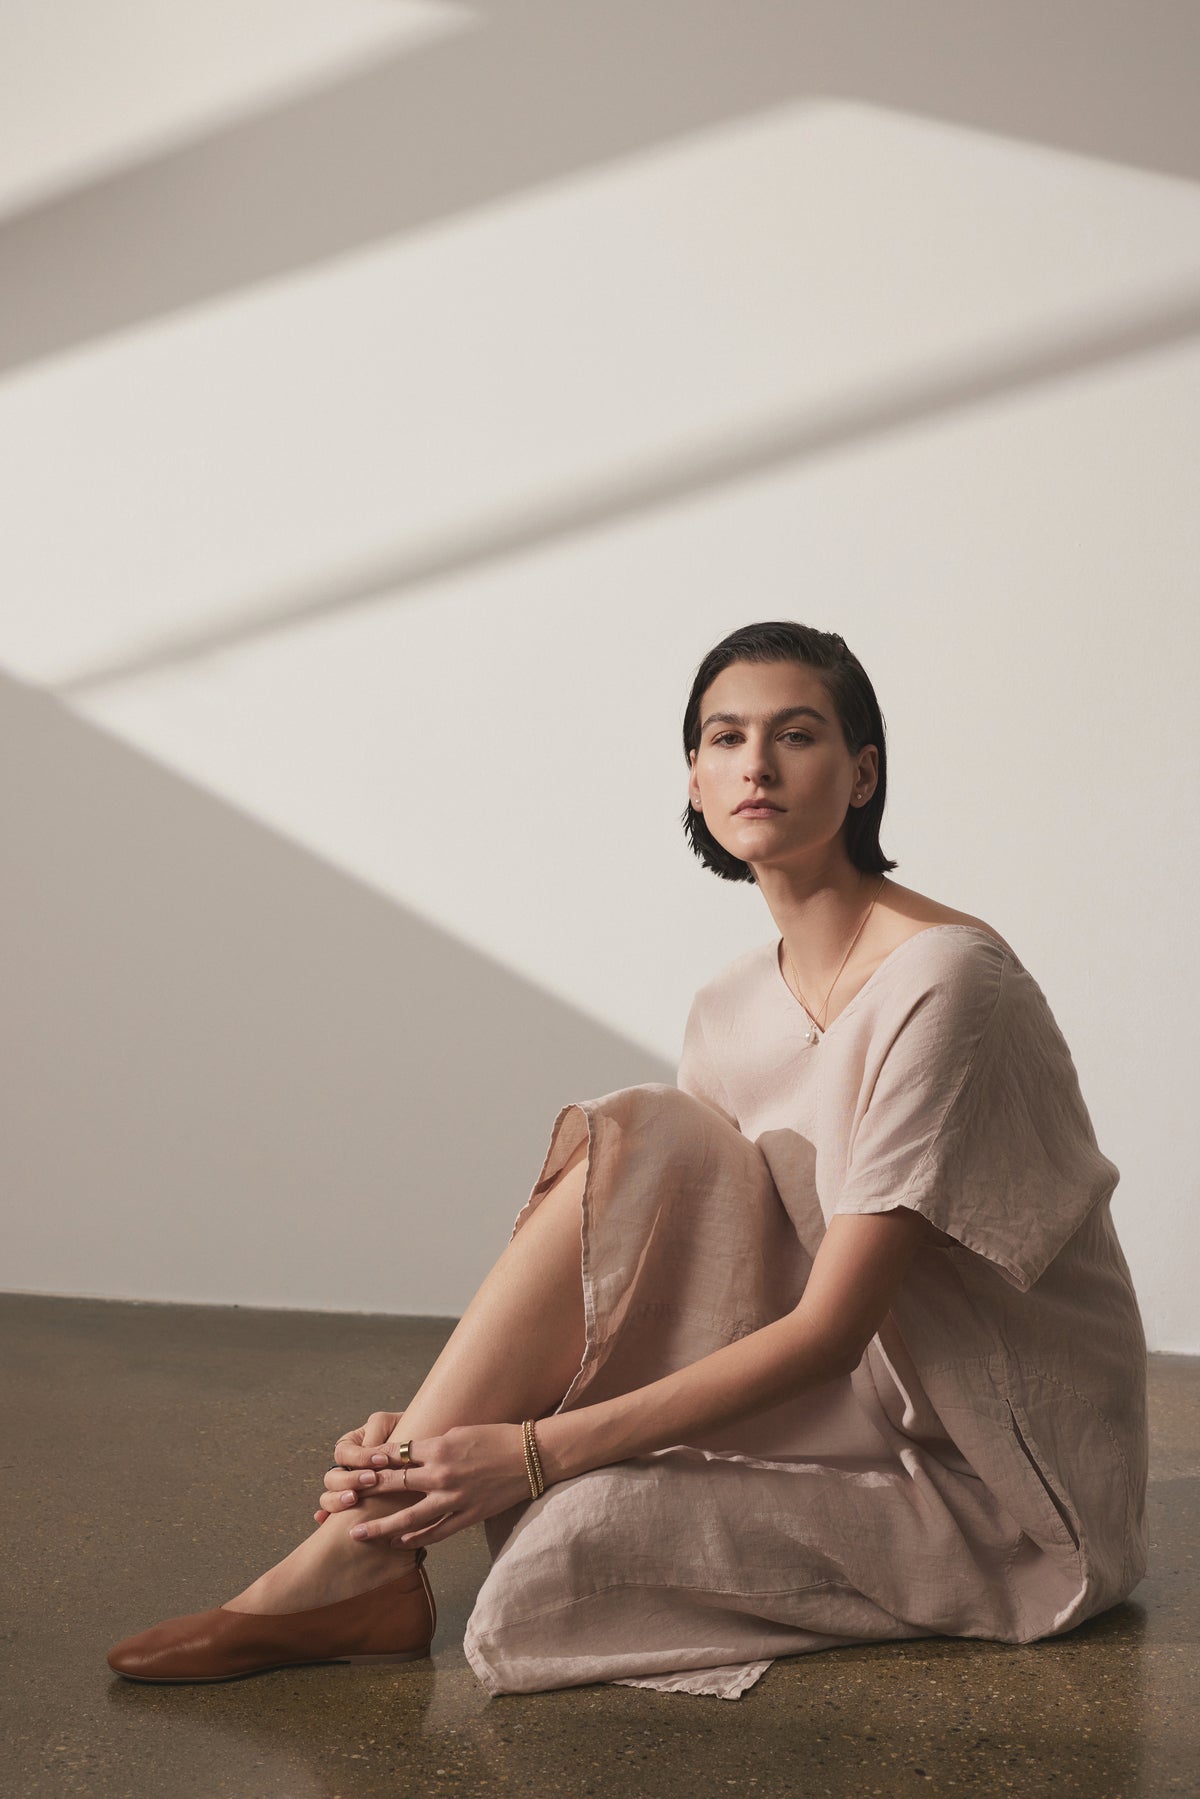 A woman in a Velvet by Jenny Graham Montana Linen Dress sits on the floor, leaning against a wall with diagonal light stripes, looking contemplatively towards the camera.-36863315181761